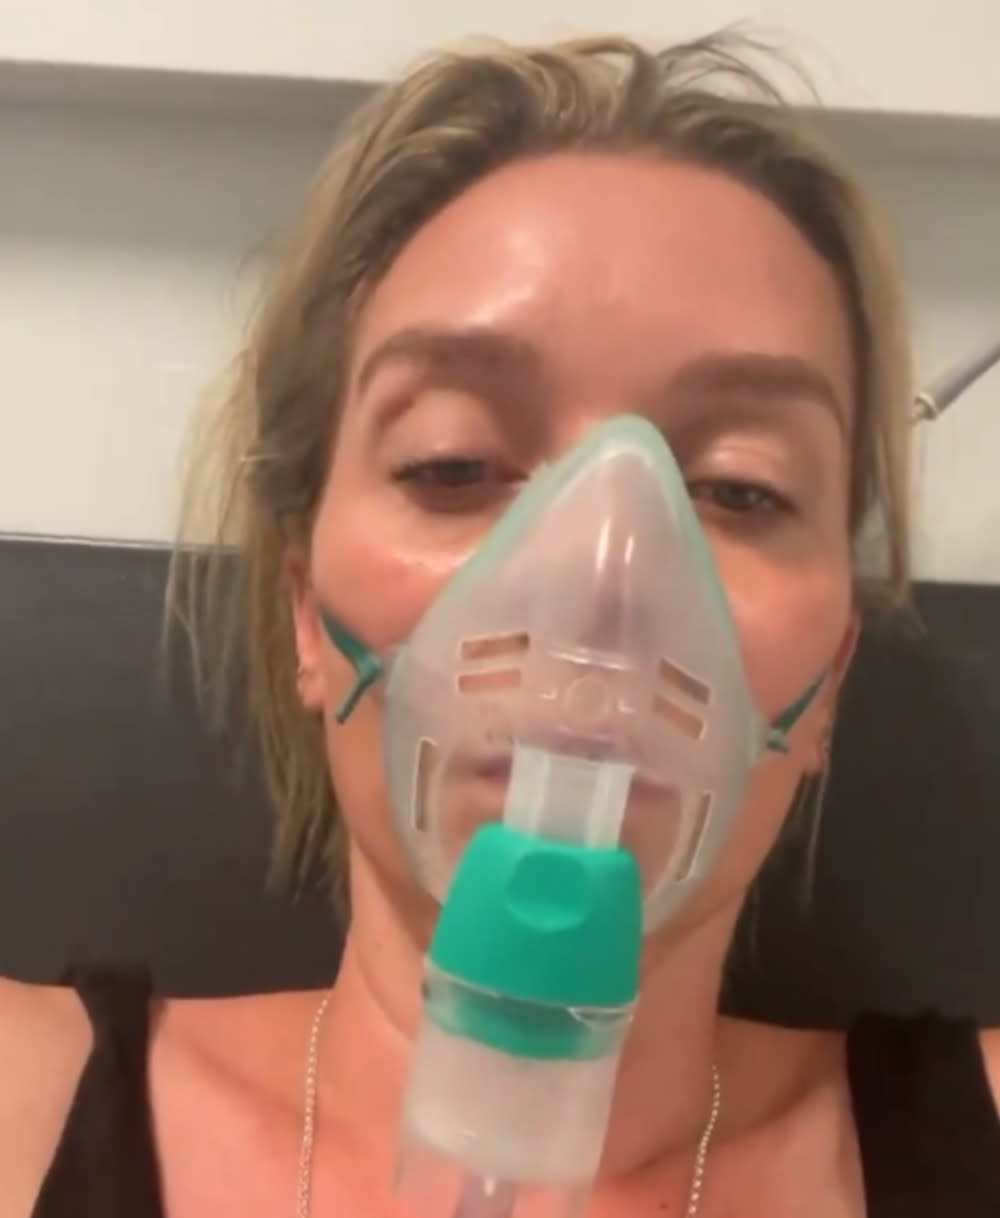 Candice Brown told her Instagram followers she had suffered a huge asthma attack and had to go to hospital. (Instagram/Candice Brown)